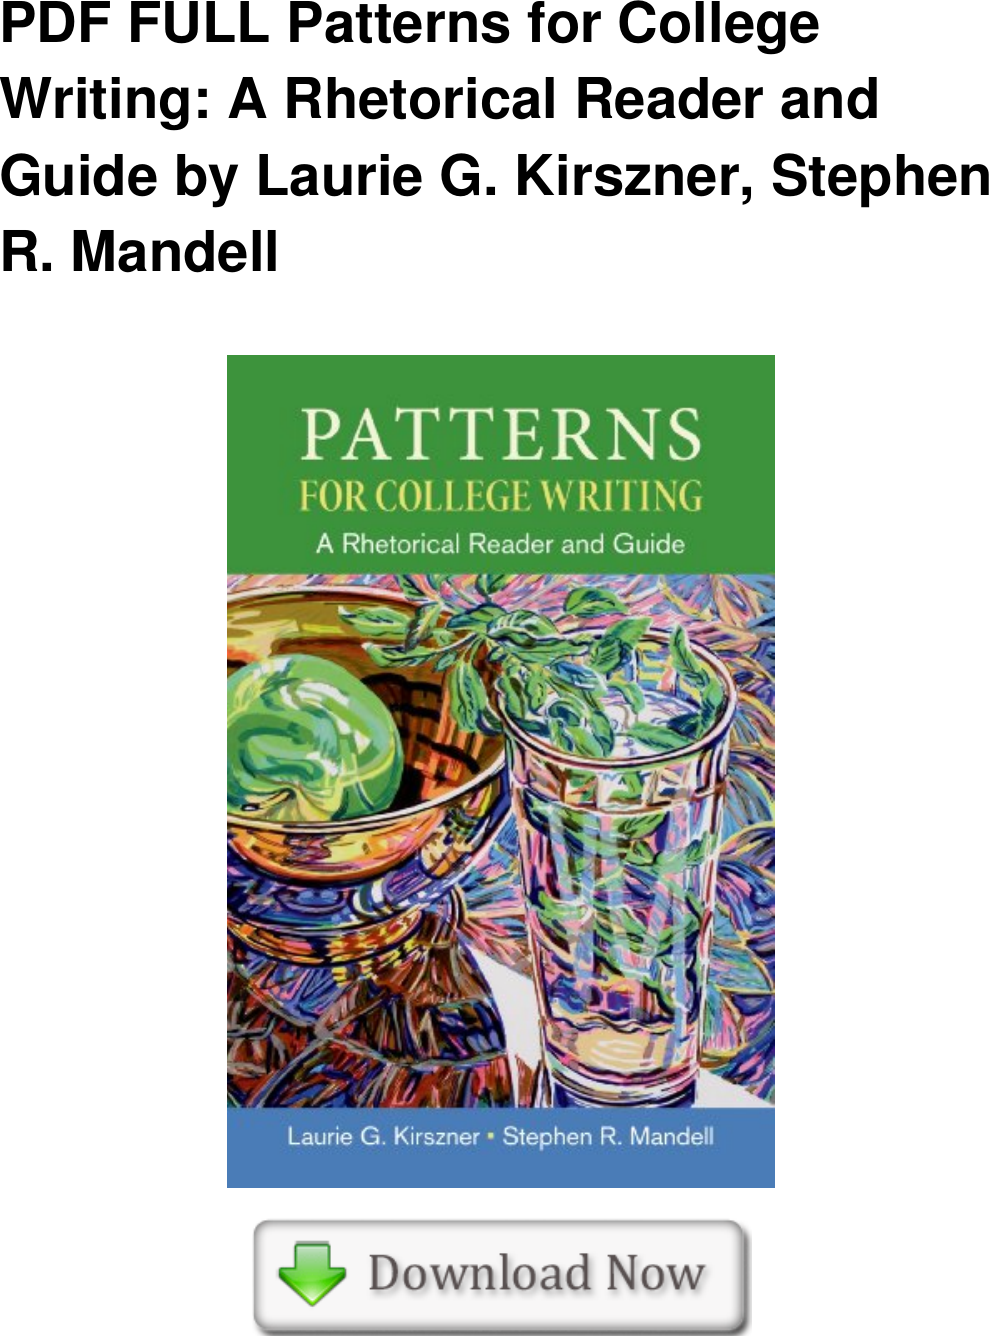 Page 1 of 3 - PDF FULL Patterns For College Writing: A Rhetorical Reader And Guide By Laurie G. Kirszner, Stephen R. Mandell Full-Book-Patterns-For-College-Writing-A-Rhetorical-Reader-And-Guide--DL3783480015